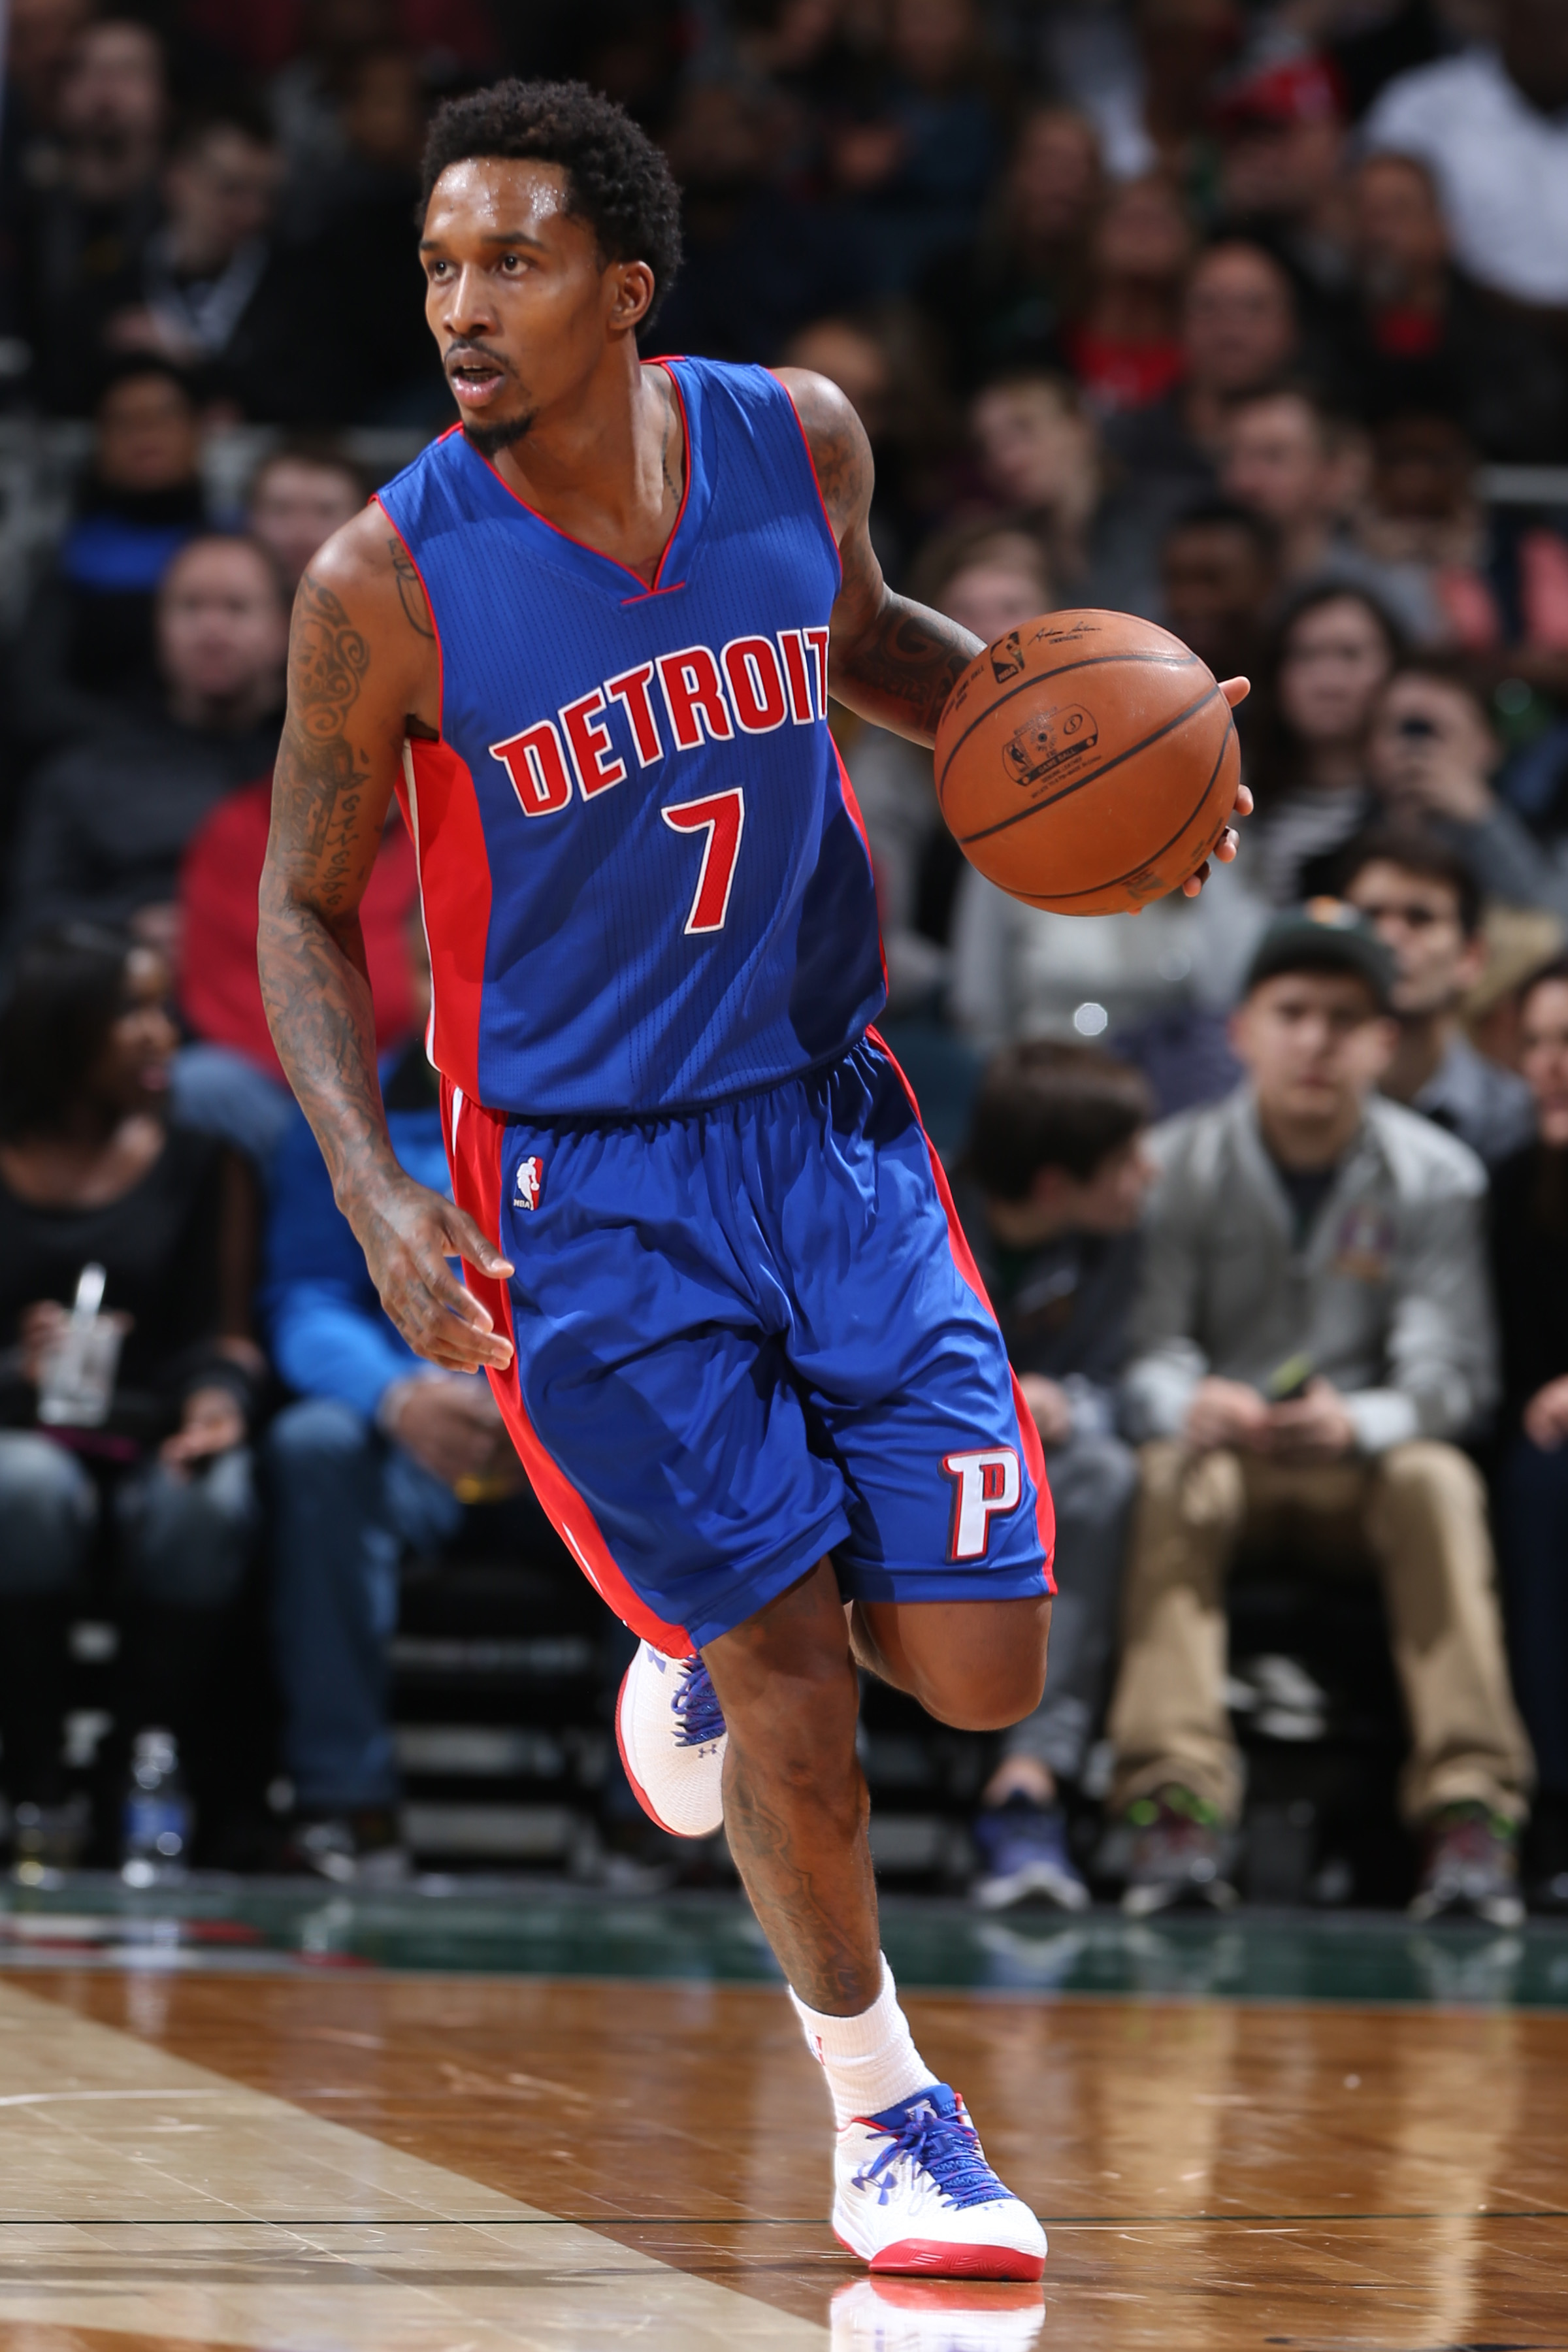 MILWAUKEE, WI - JANUARY 24: Brandon Jennings #7 of the Detroit Pistons handles the ball against the Milwaukee Bucks on January 24, 2015 at BMO Harris Bradley Center in Milwaukee, Wisconsin . (Photo by Gary Dineen/NBAE via Getty Images)